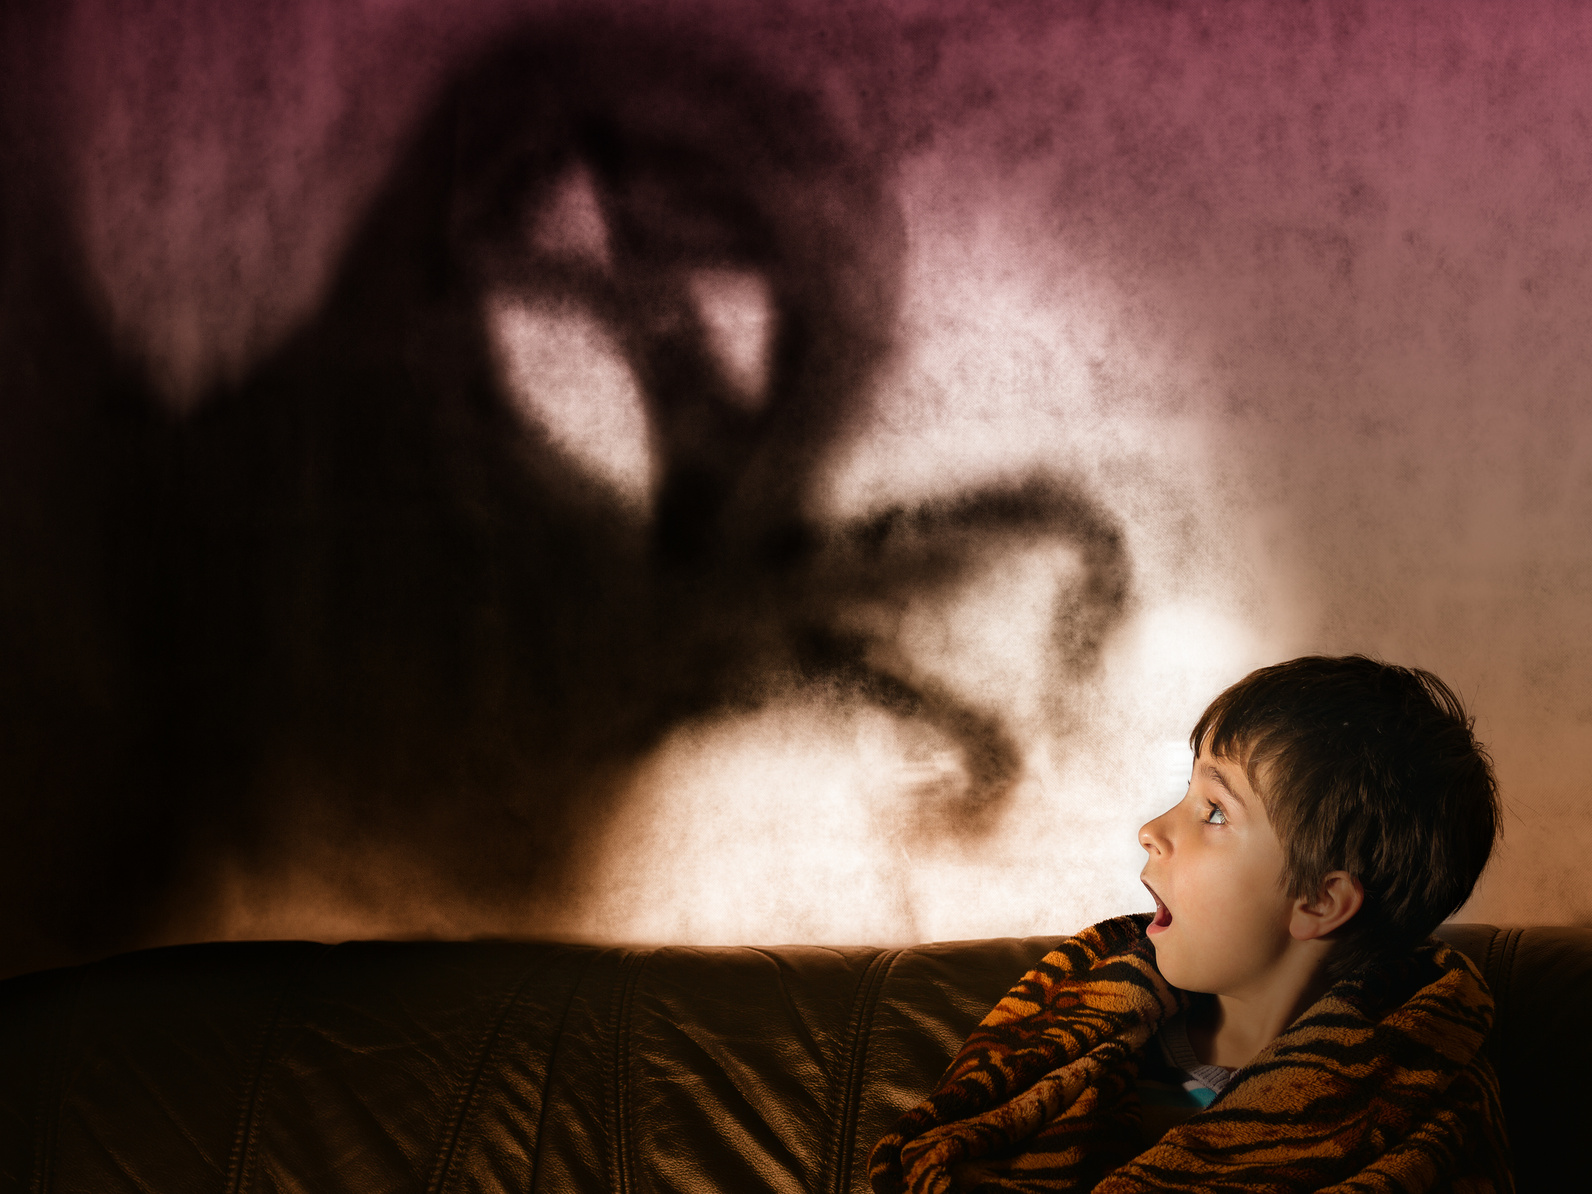 The boy is afraid of ghosts at night